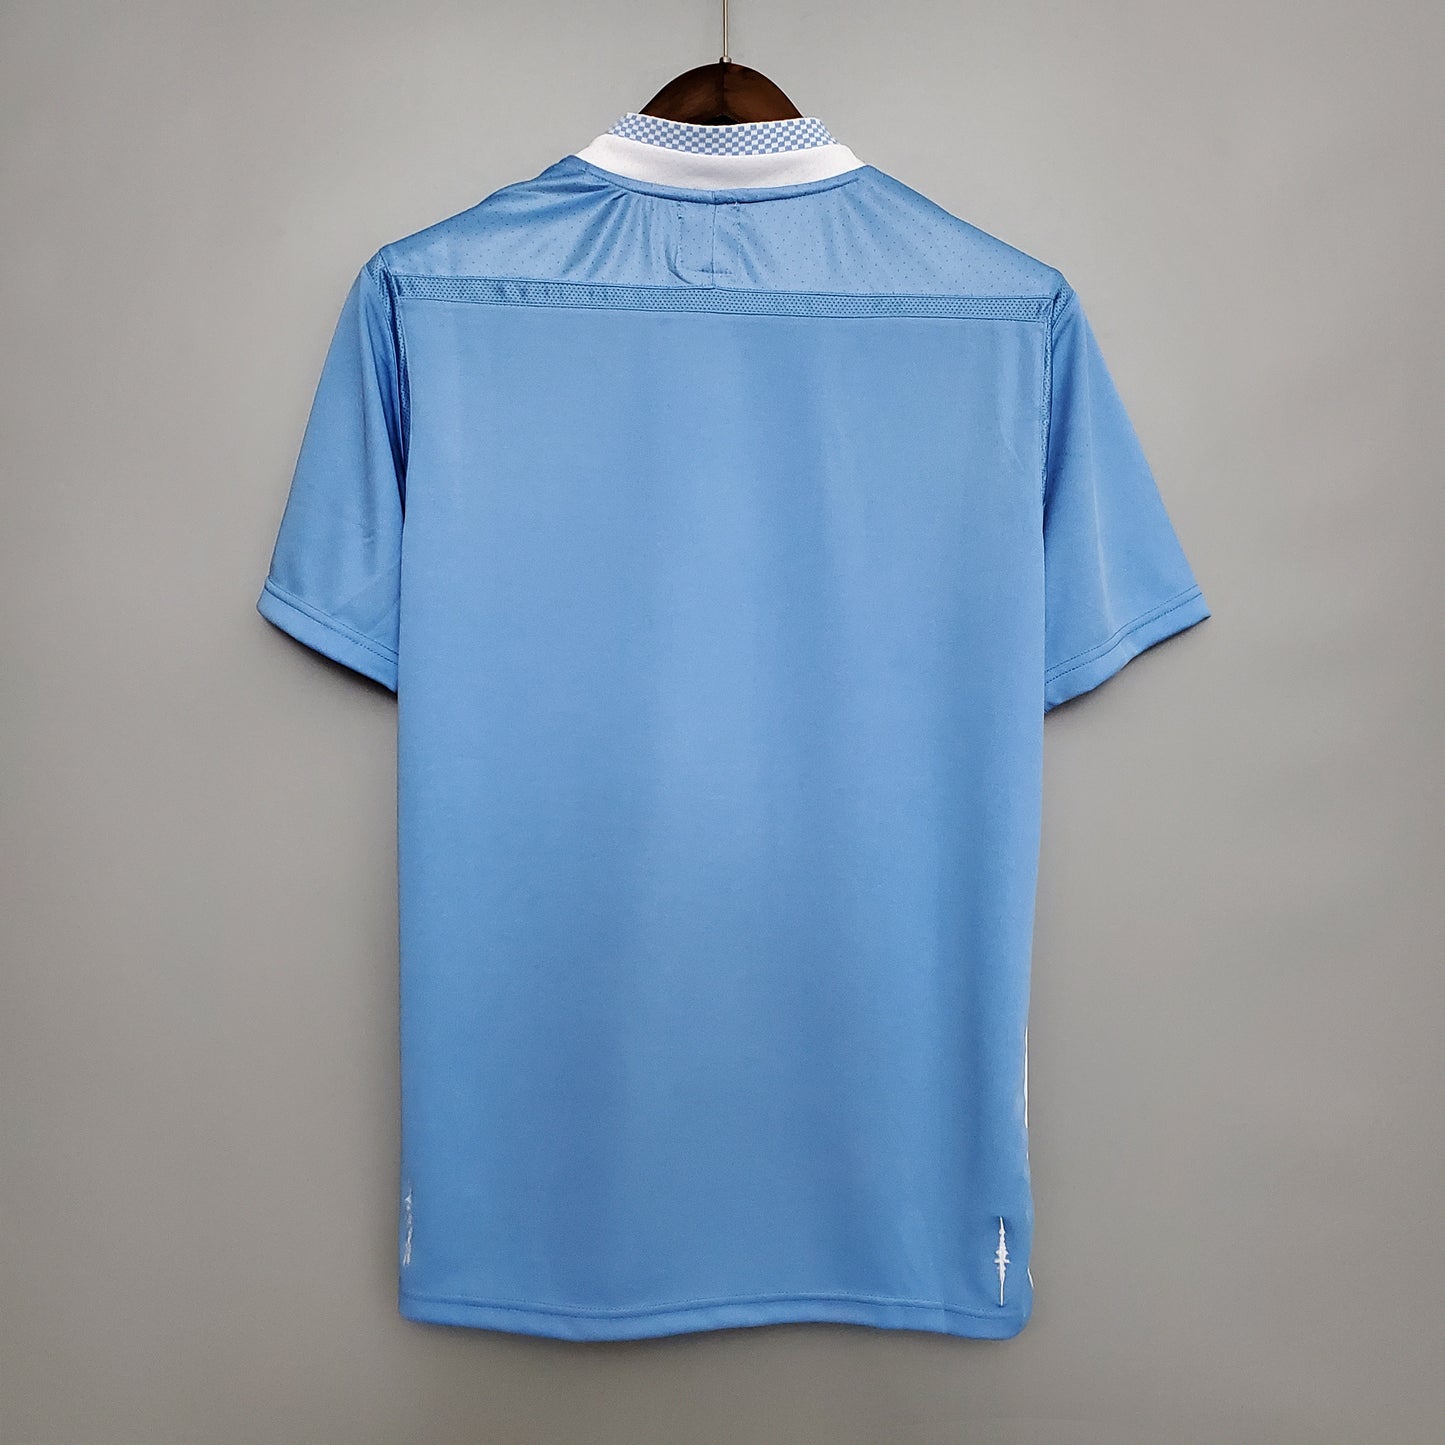 Manchester City 2011/12 Home Jersey